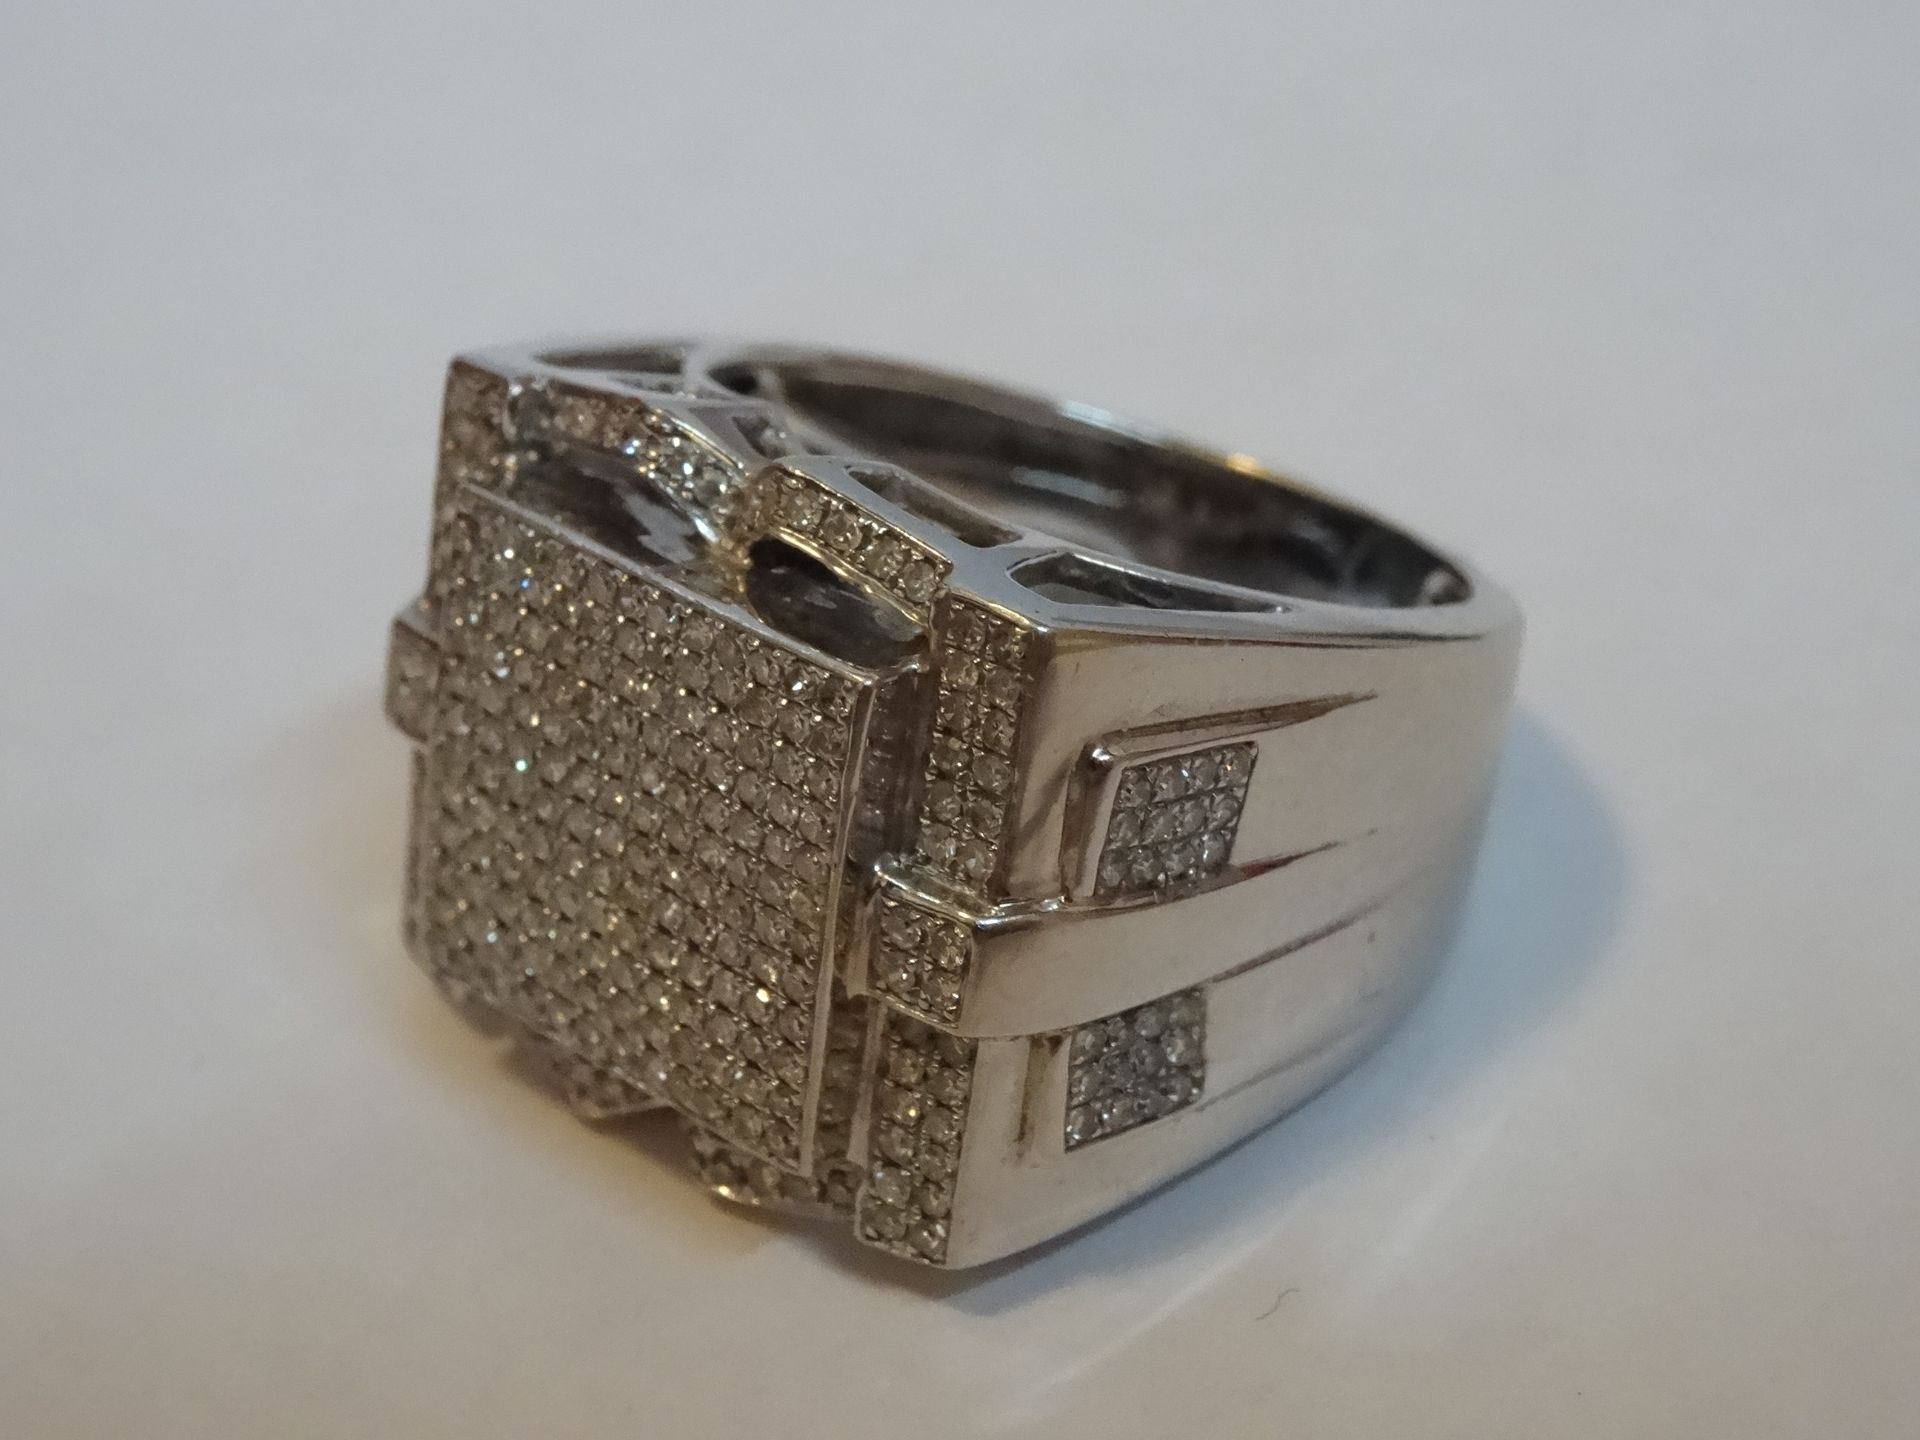 9 Carat White Gold Gents Signet Ring. Contains 1.55 Carats of Diamonds. - Image 5 of 6